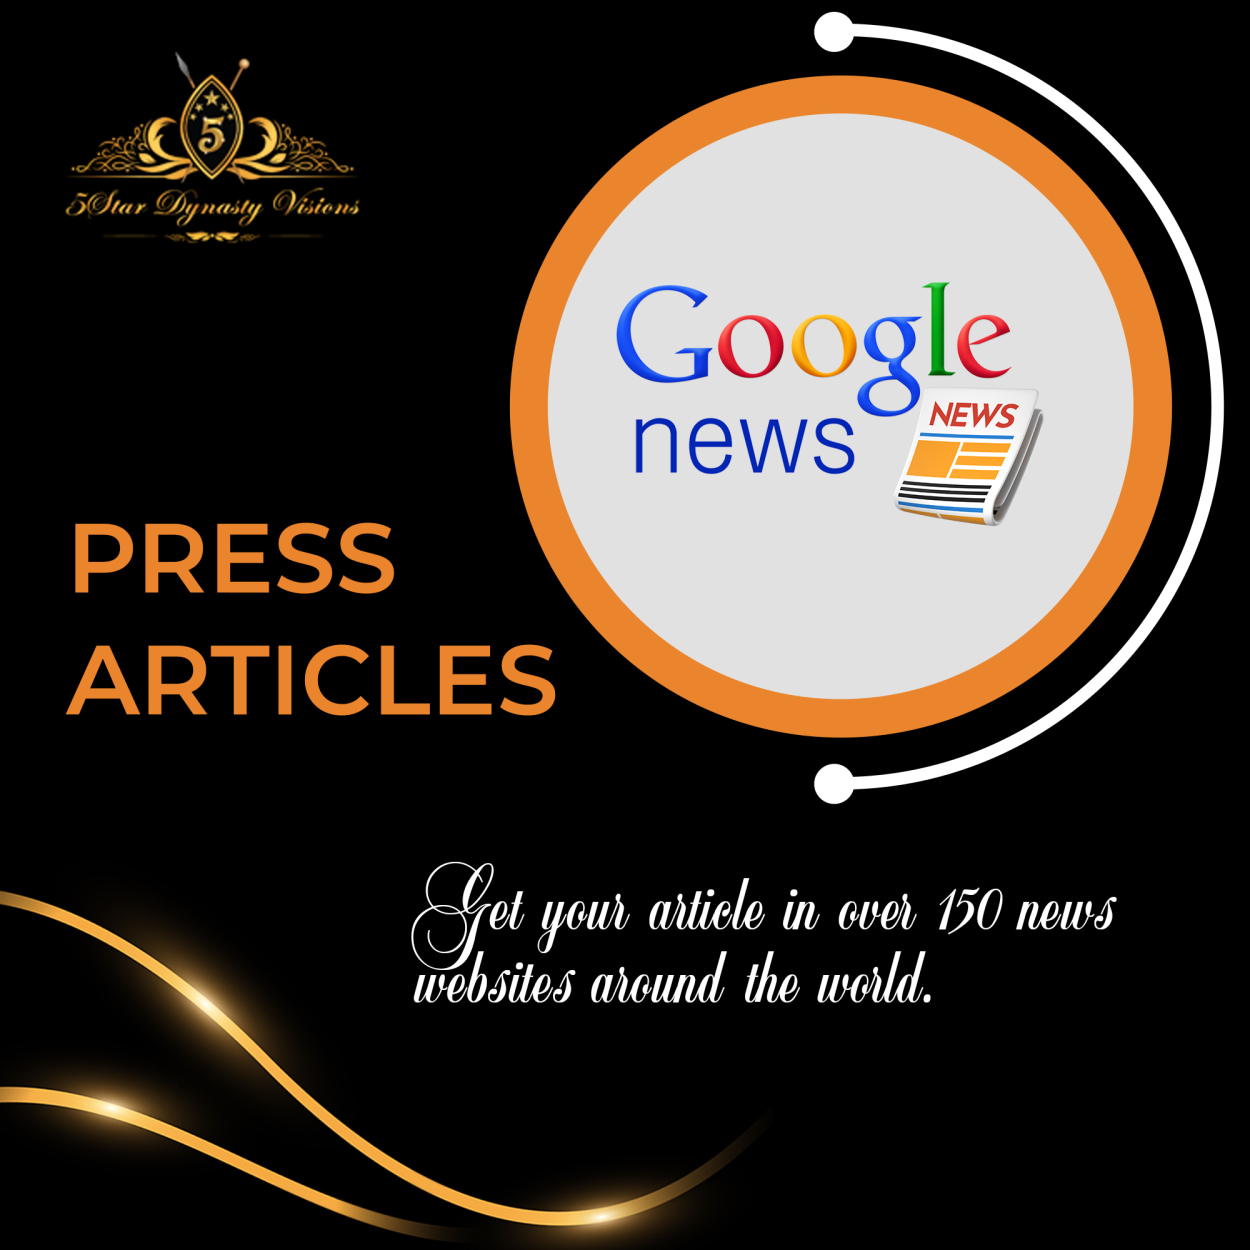 5Star Dynasty Visions is taking your online presence to new heights with our cutting-edge service!  🔥 Introducing our Google Press Articles service: ✅ Your blog posts featured on Google Press ✅ Promotion on 150/180 news blogs, including ASK News, American News Reporter, FOX40, Belgium Daily News, Google News, Platform X, and more ✅ SEO-optimized articles for maximum exposure